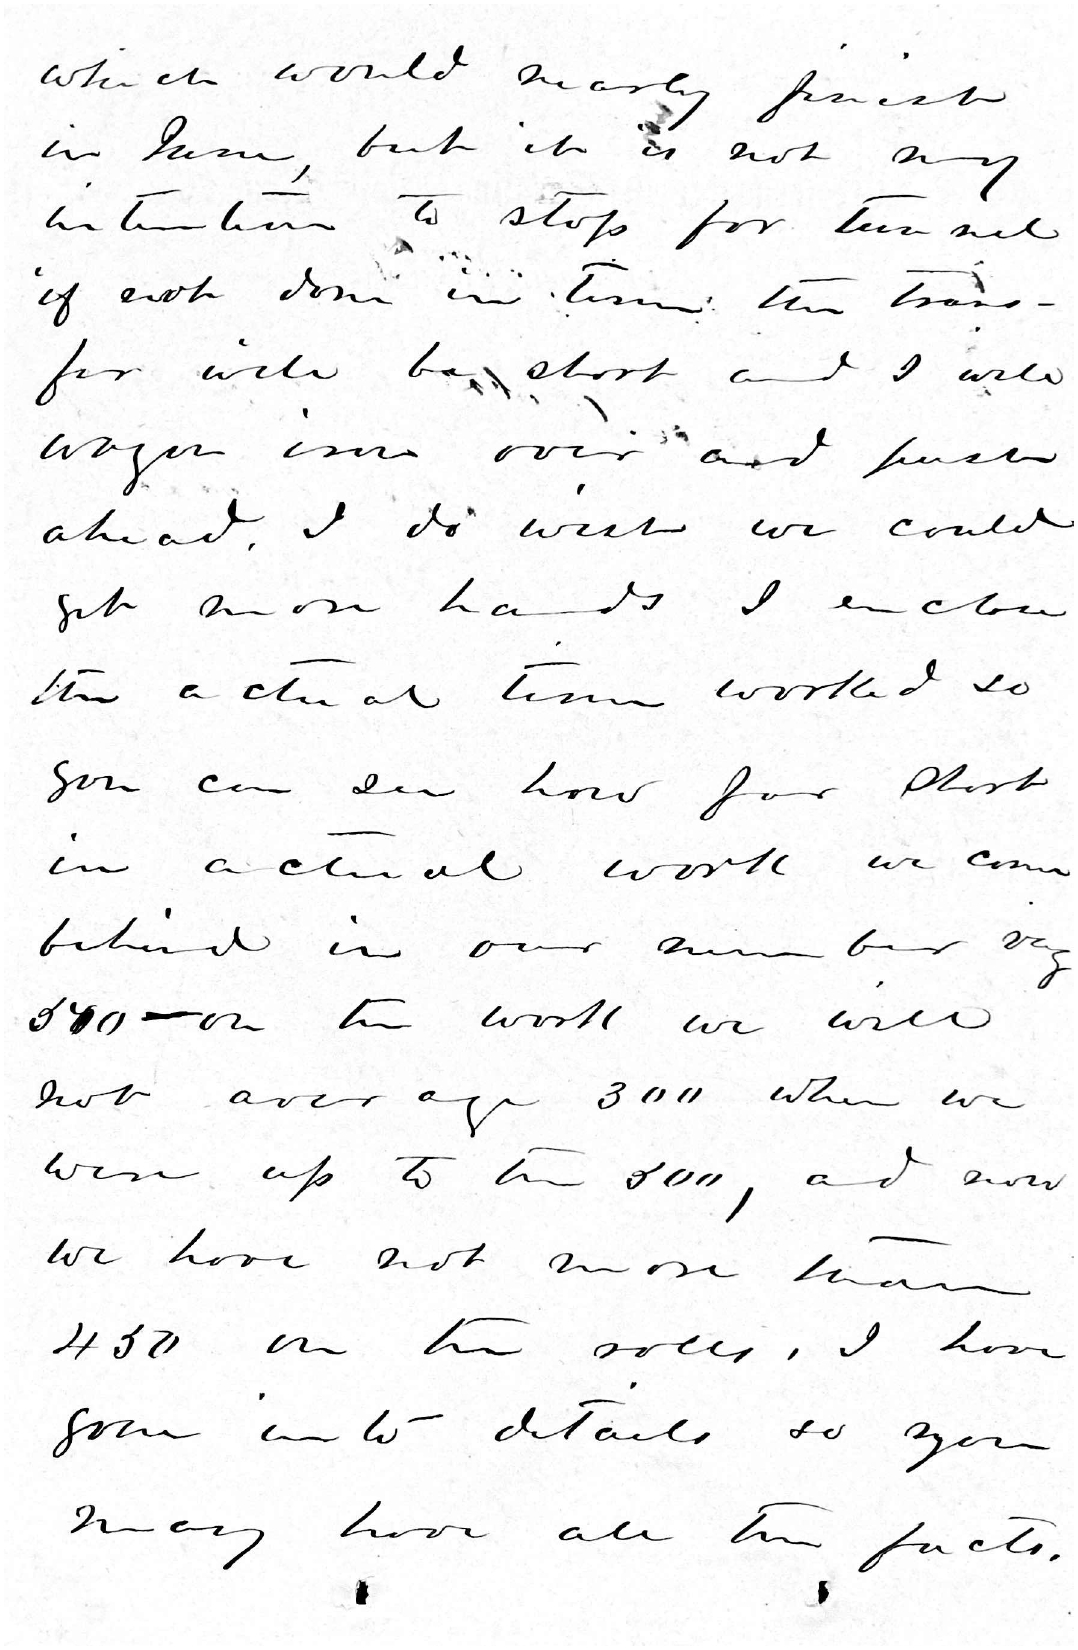 JWW to ZBV, 4 March 1878 p 2